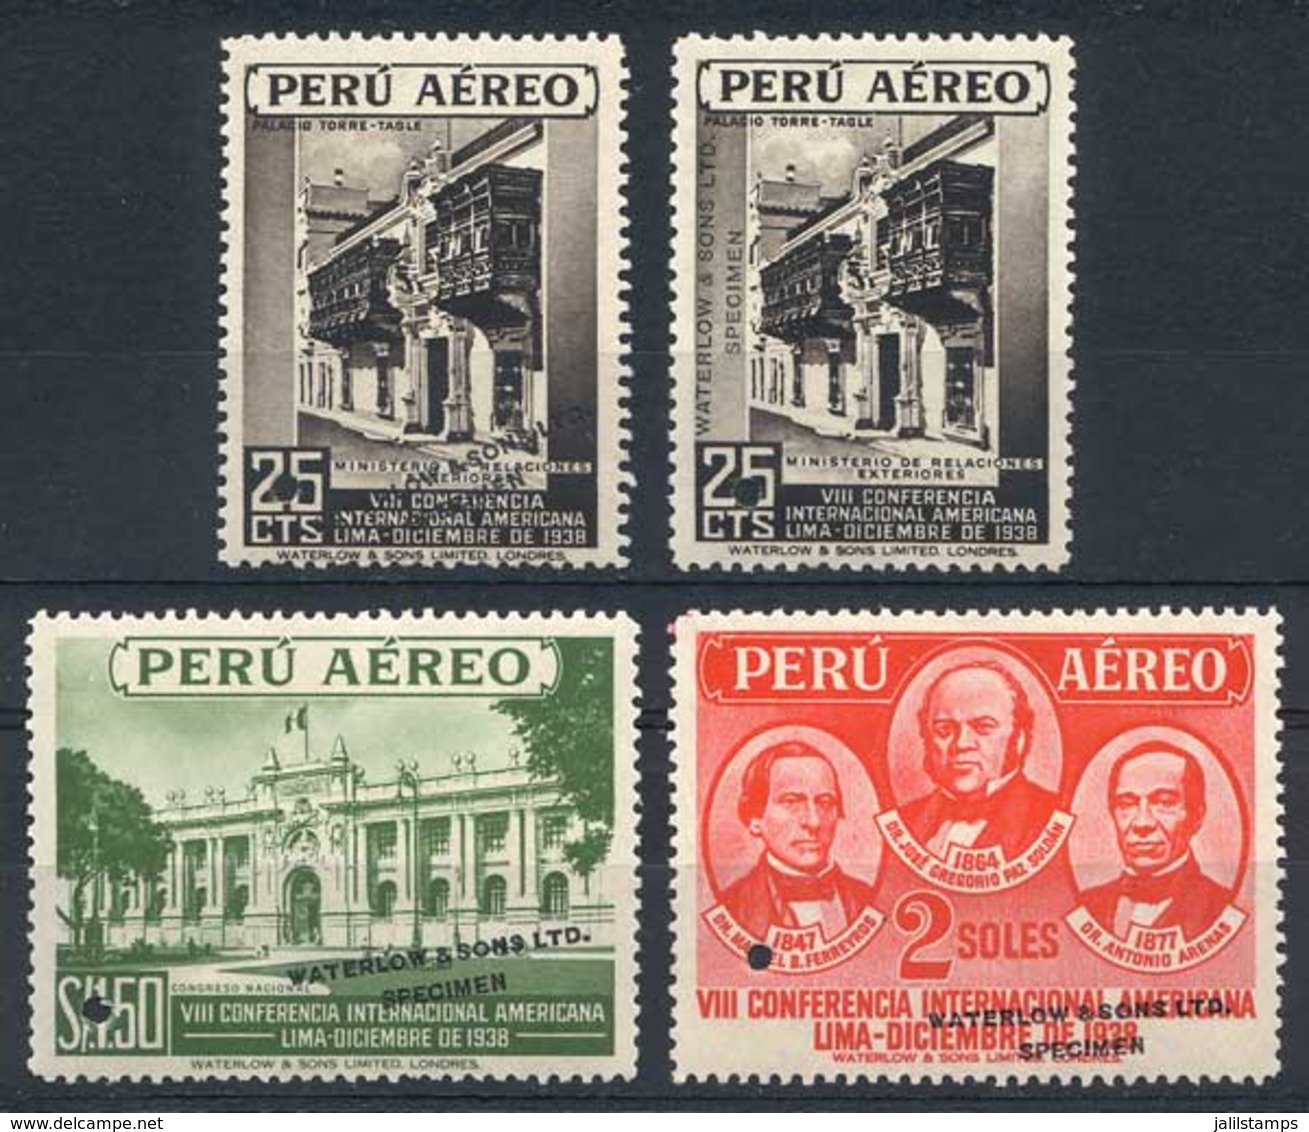 PERU: Yvert 62/64, 1938 Panamerican Congress, 4 Stamps With Little Punch Cancel And Overprinted "WATERLOW & SONS LTD - S - Perú